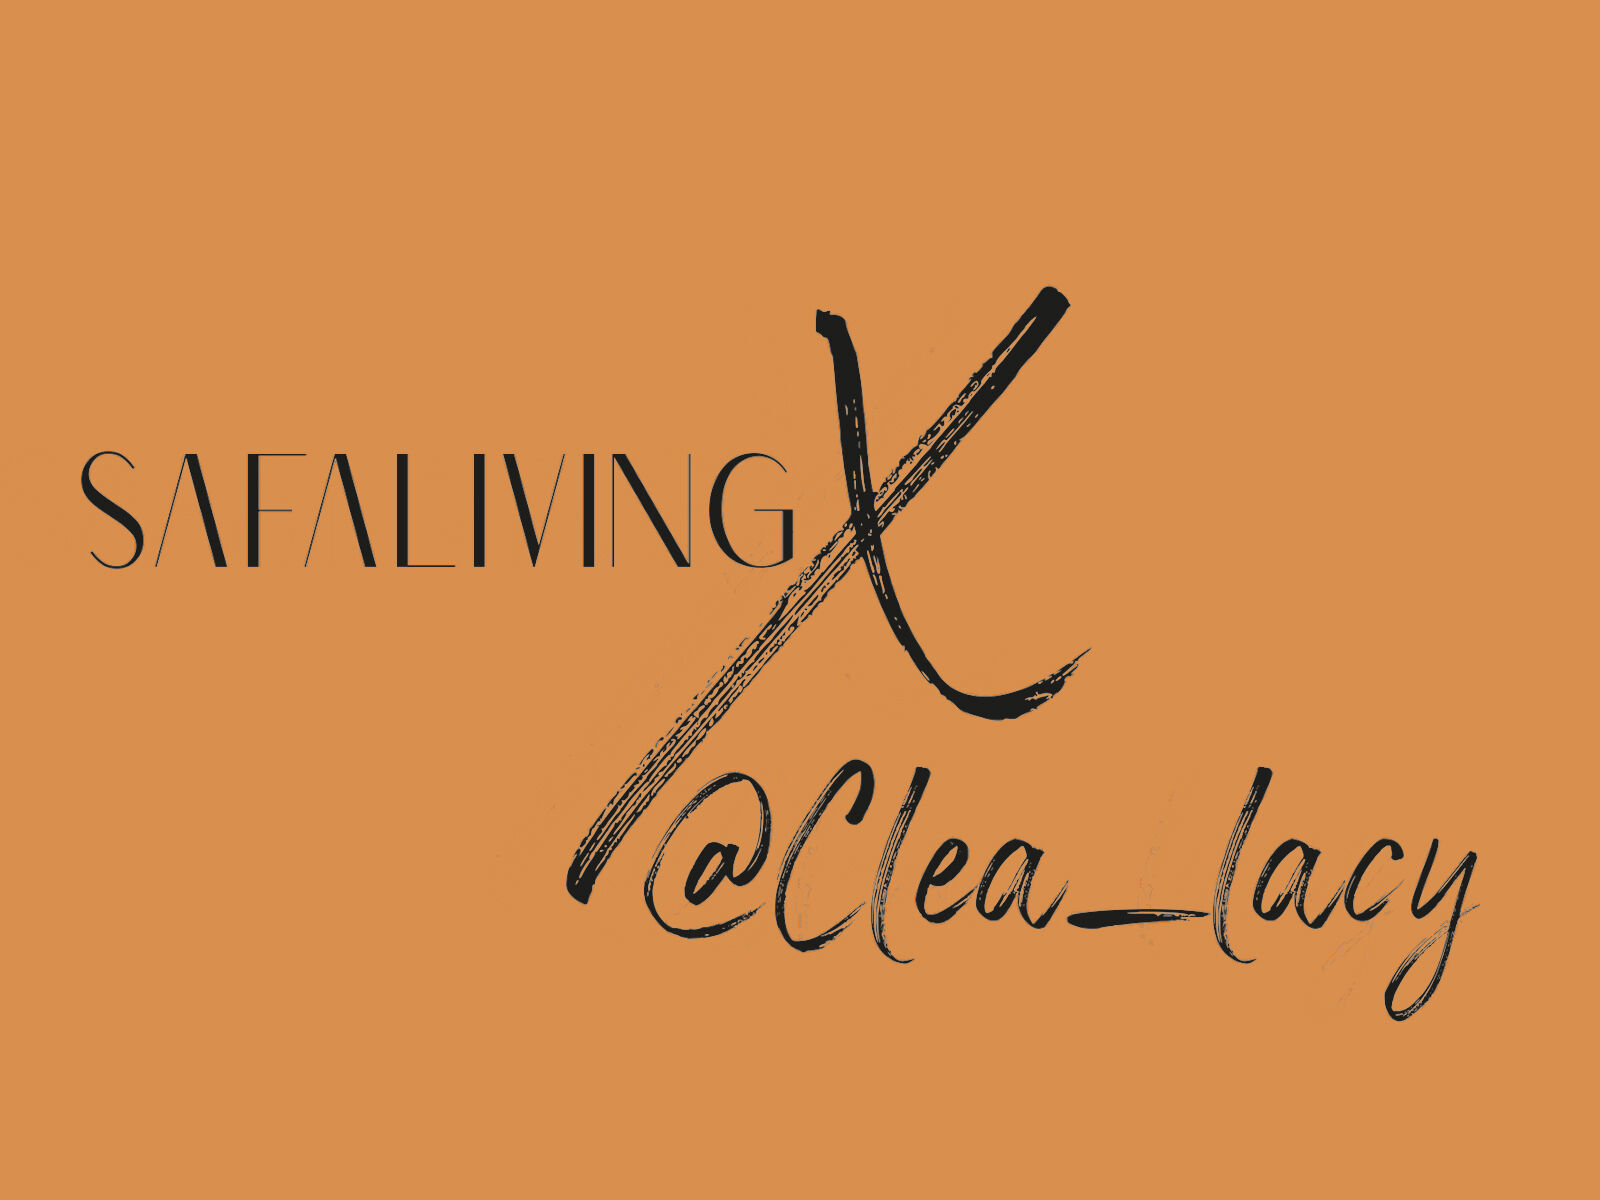 safaliving x clea lacy